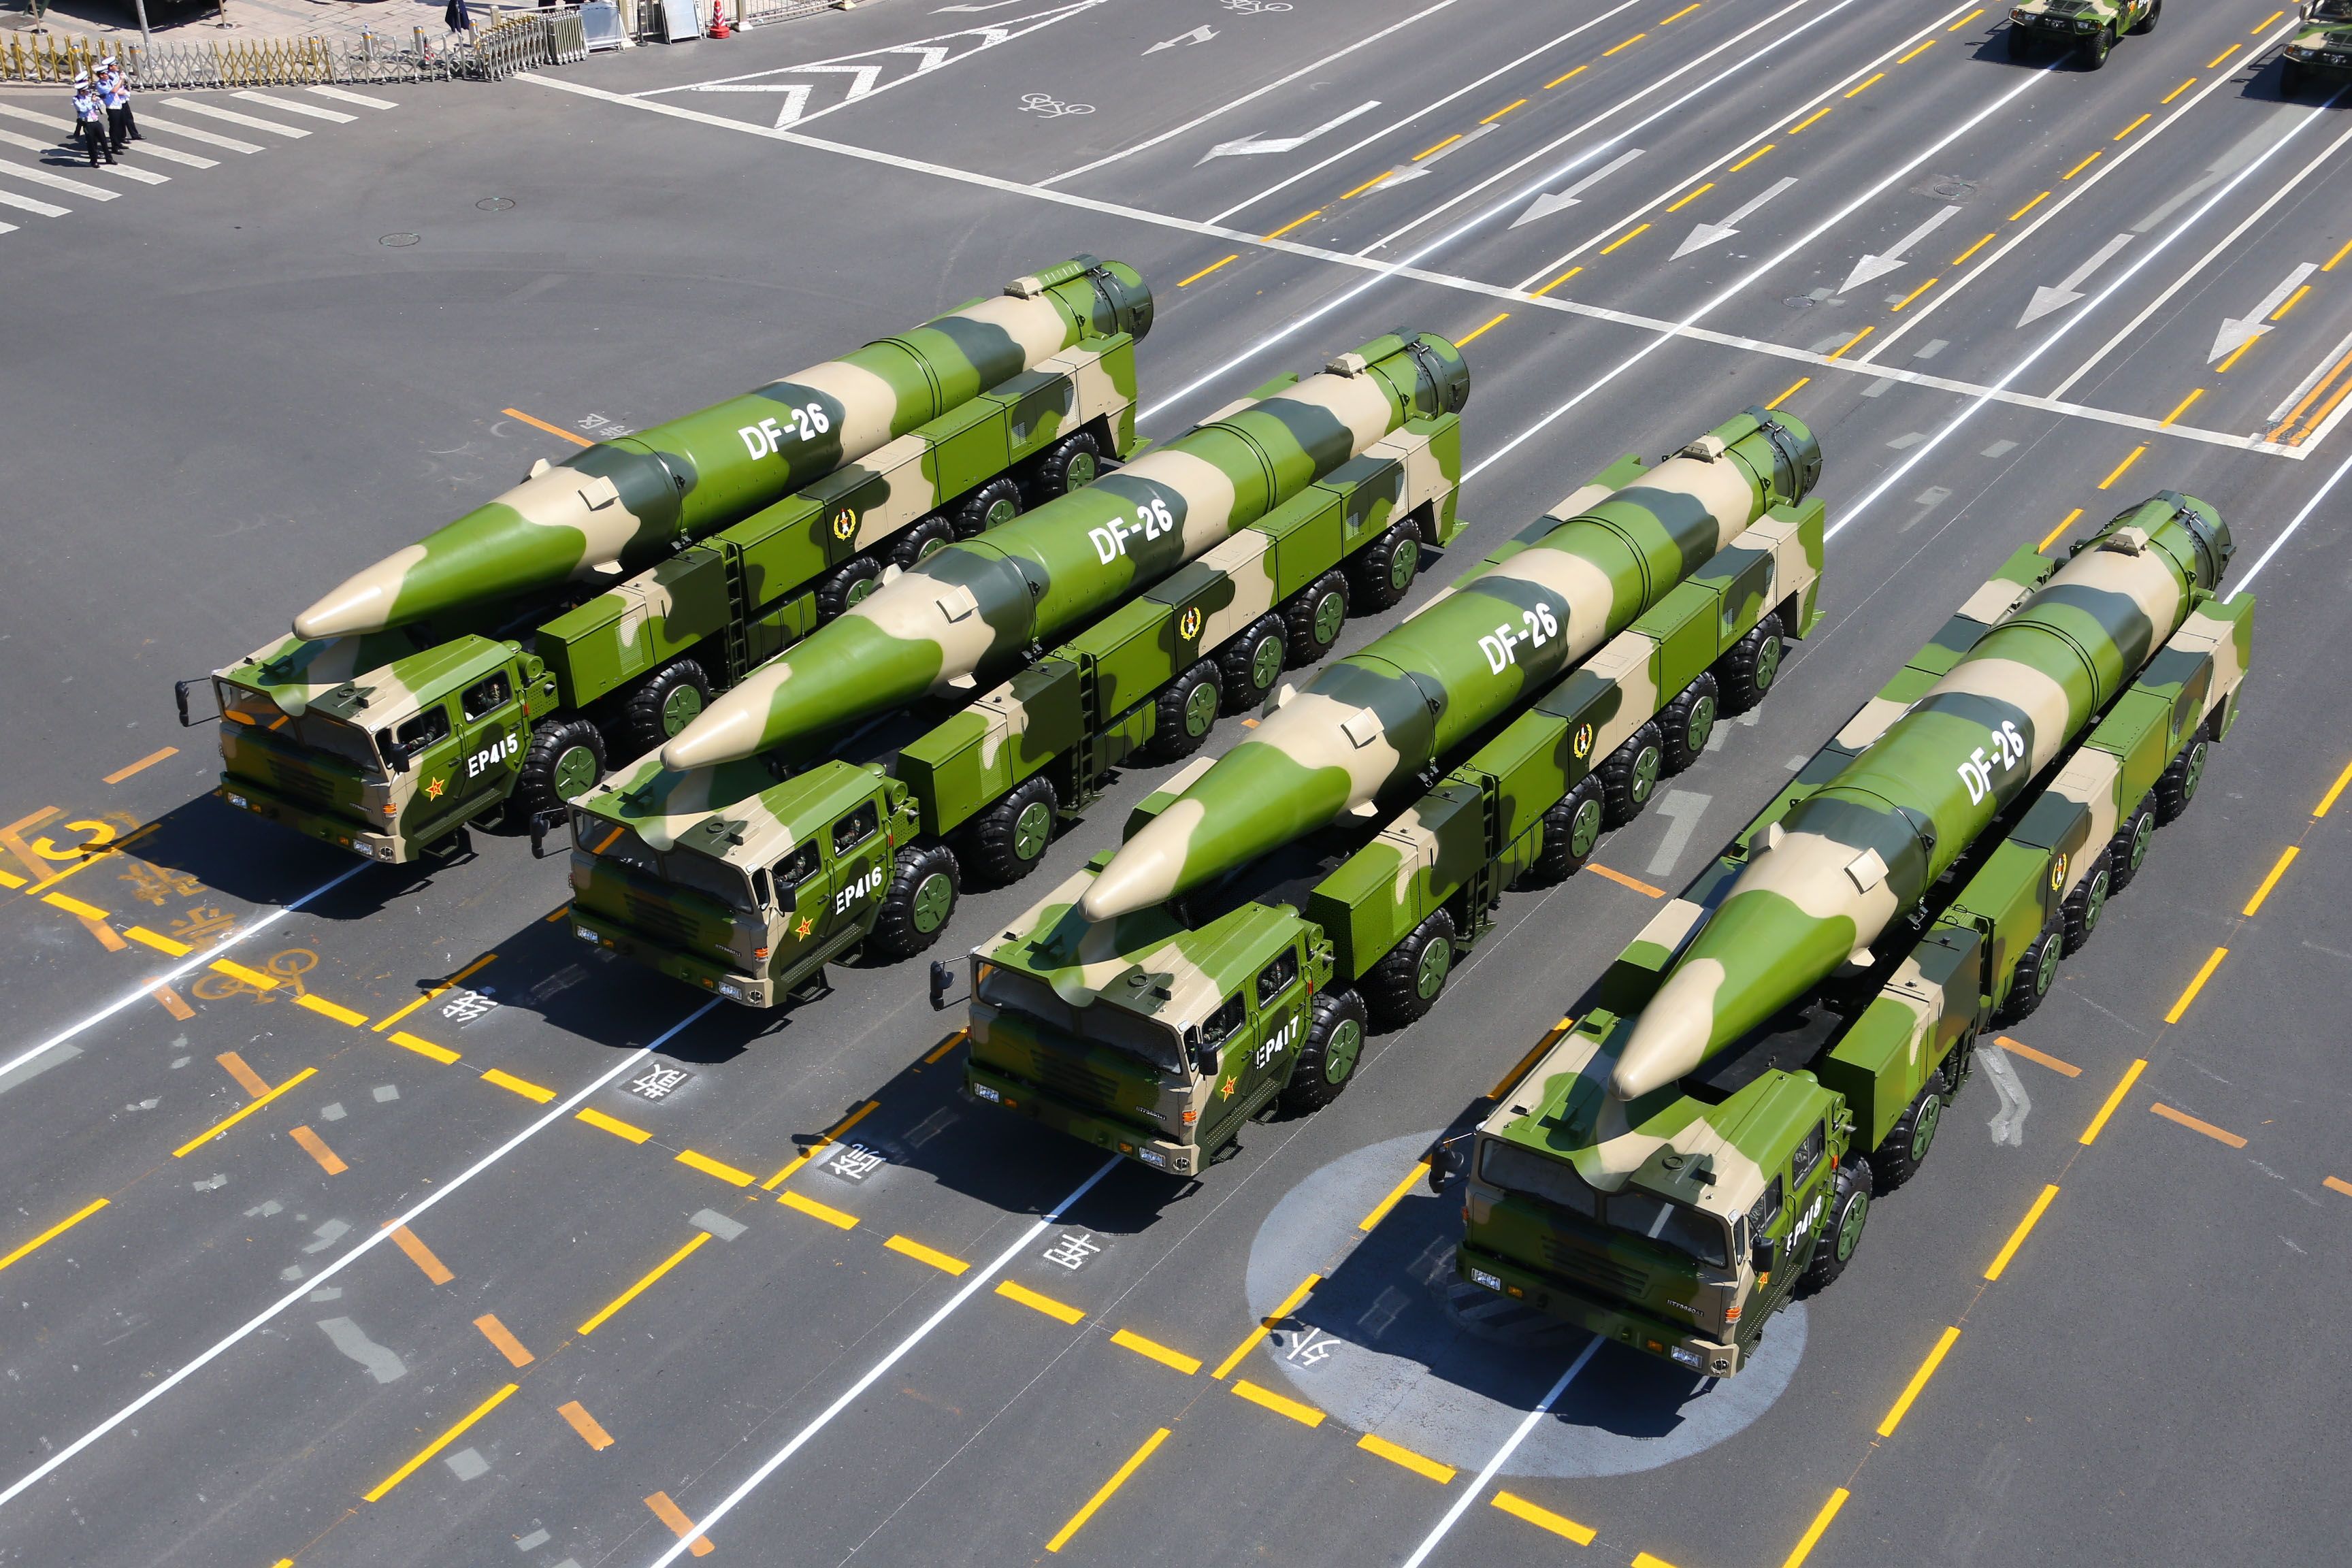 China hypersonic missile test shockwaves through the world